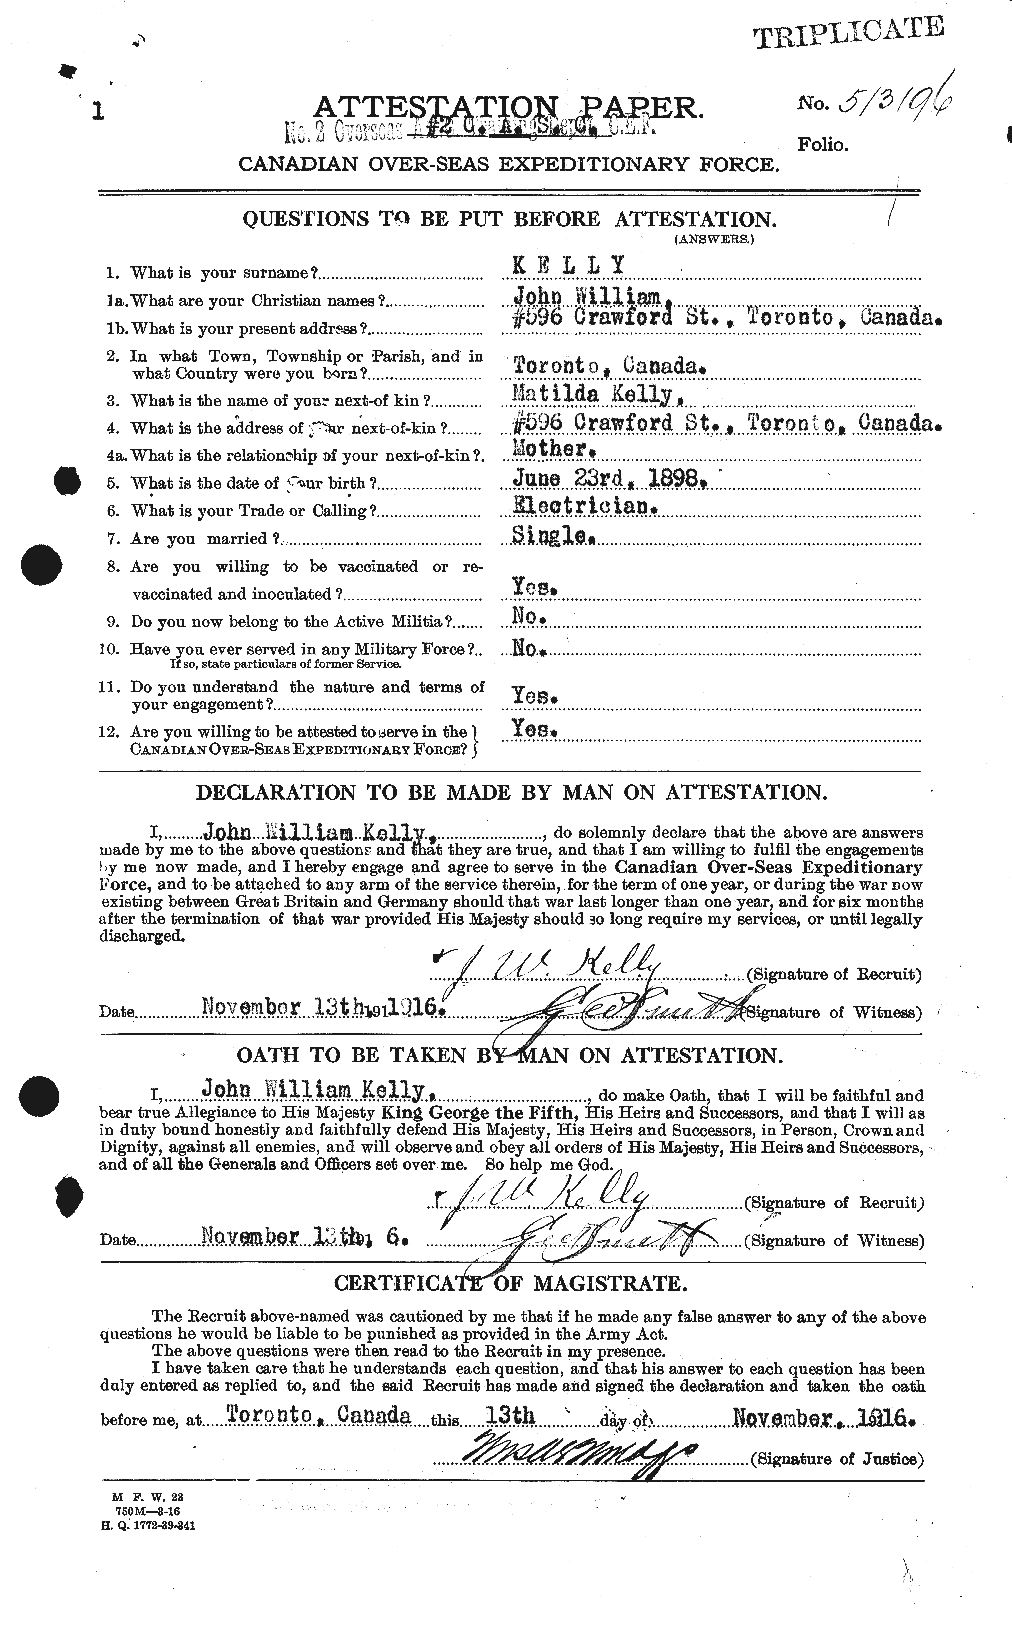 Personnel Records of the First World War - CEF 429852a